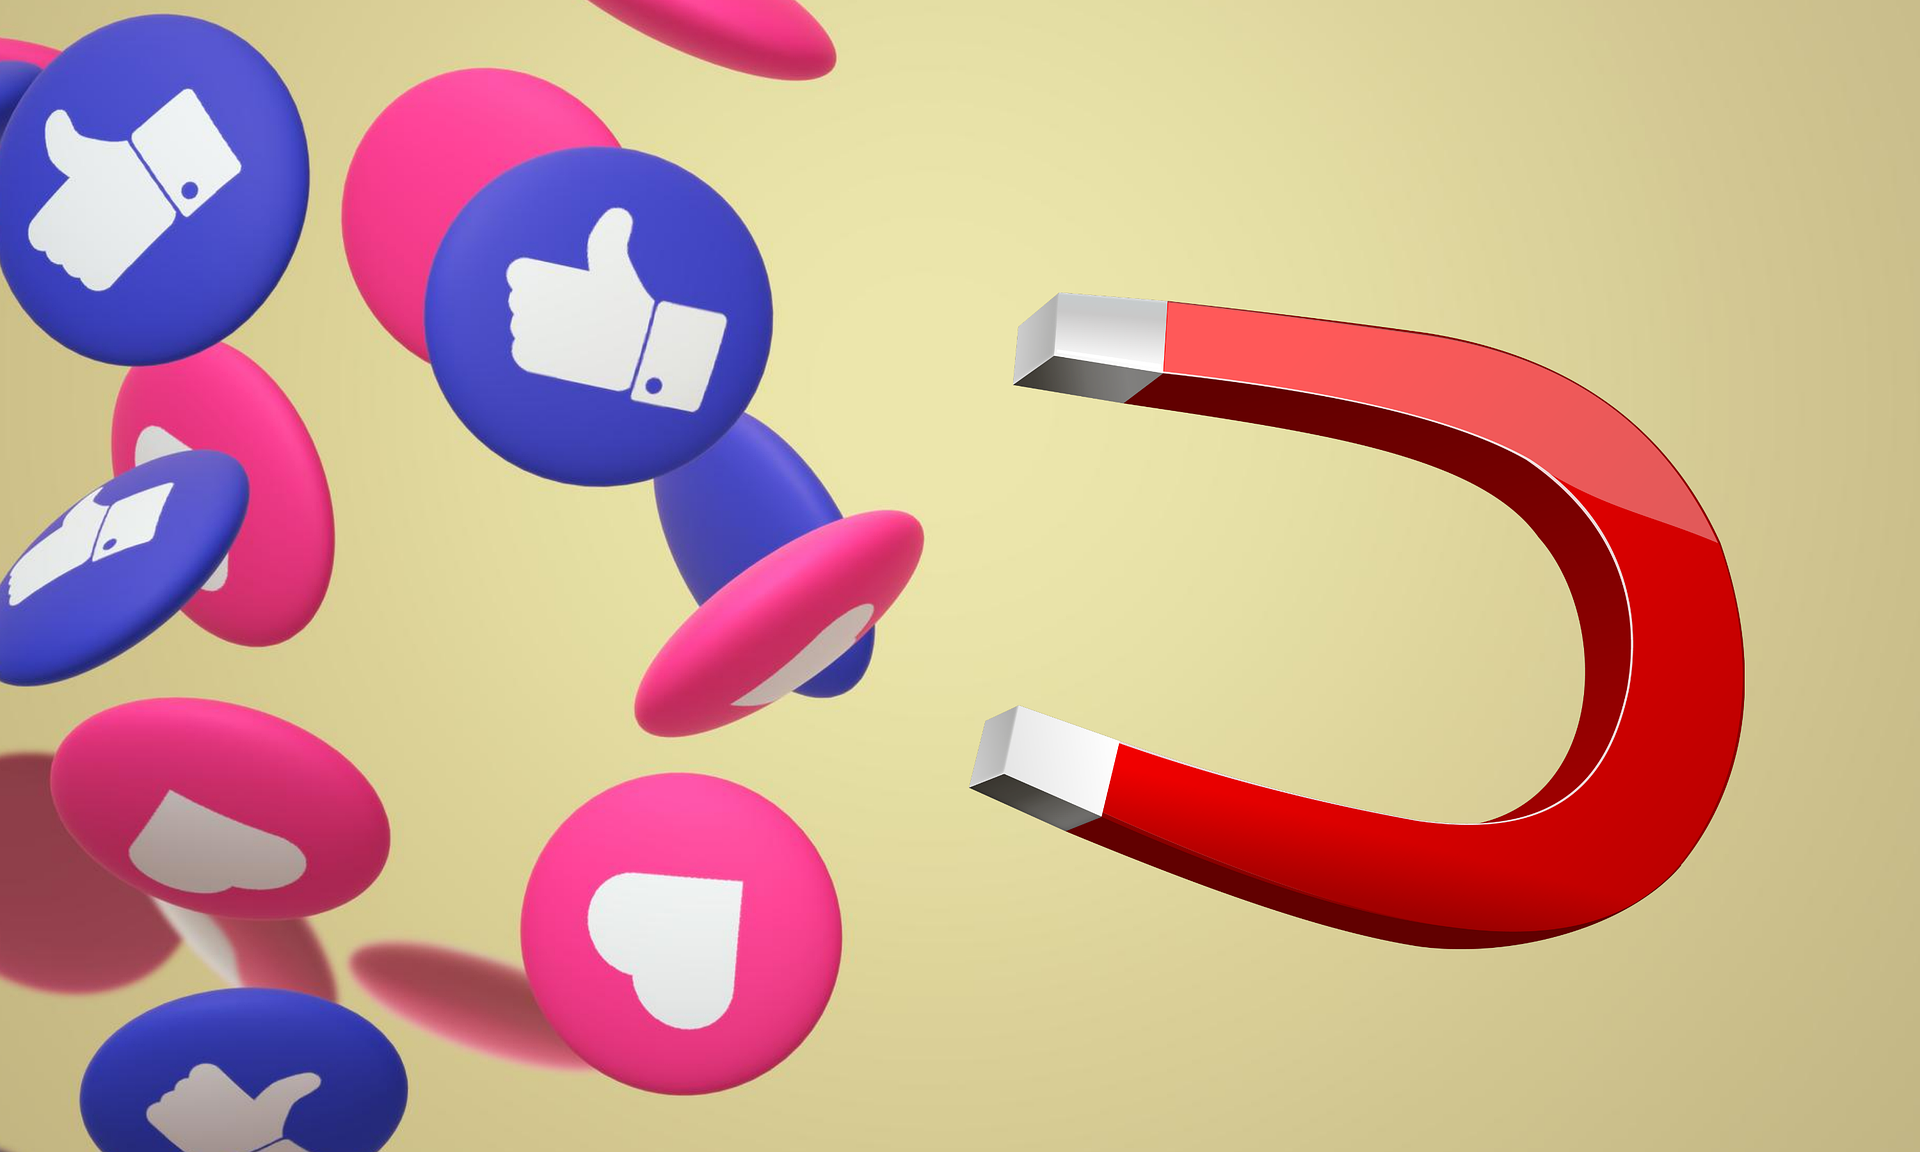 A magnet pulling likes and loves to it from social media.